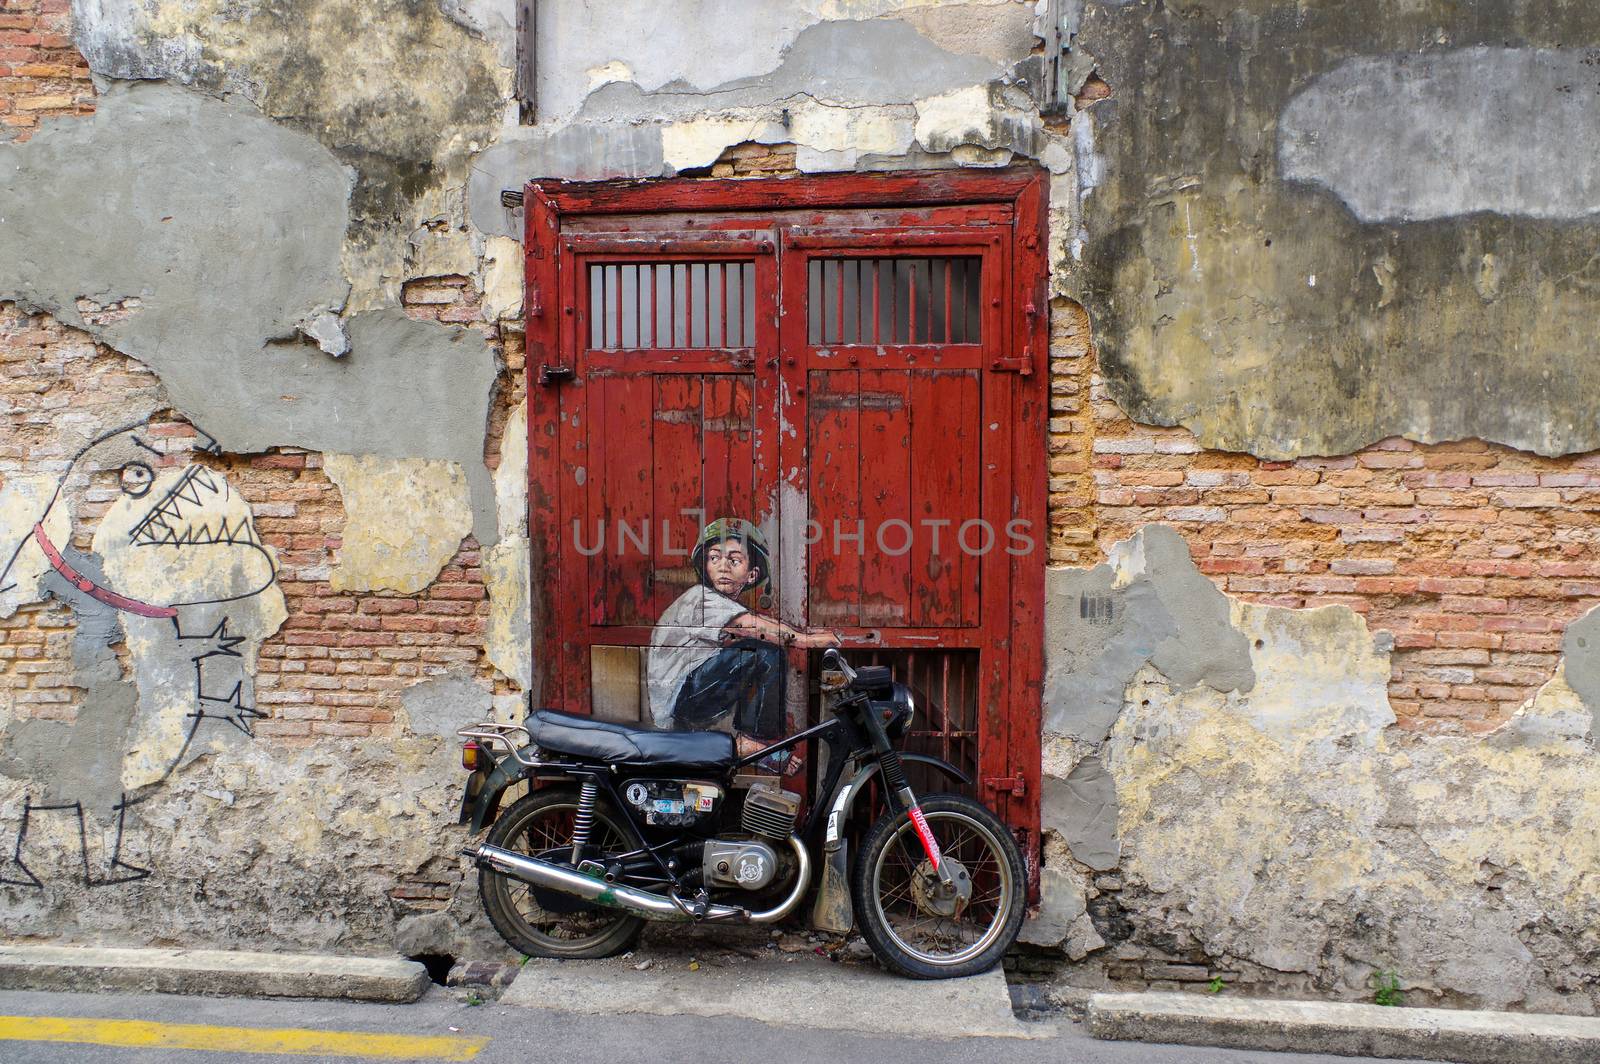 PENANG, MALAYSIA - April 18, 2016: A General view of a mural 'Boy on a Bike' painted by Ernest Zacharevic. The mural is one of the 9 murals paintings in early 2012.